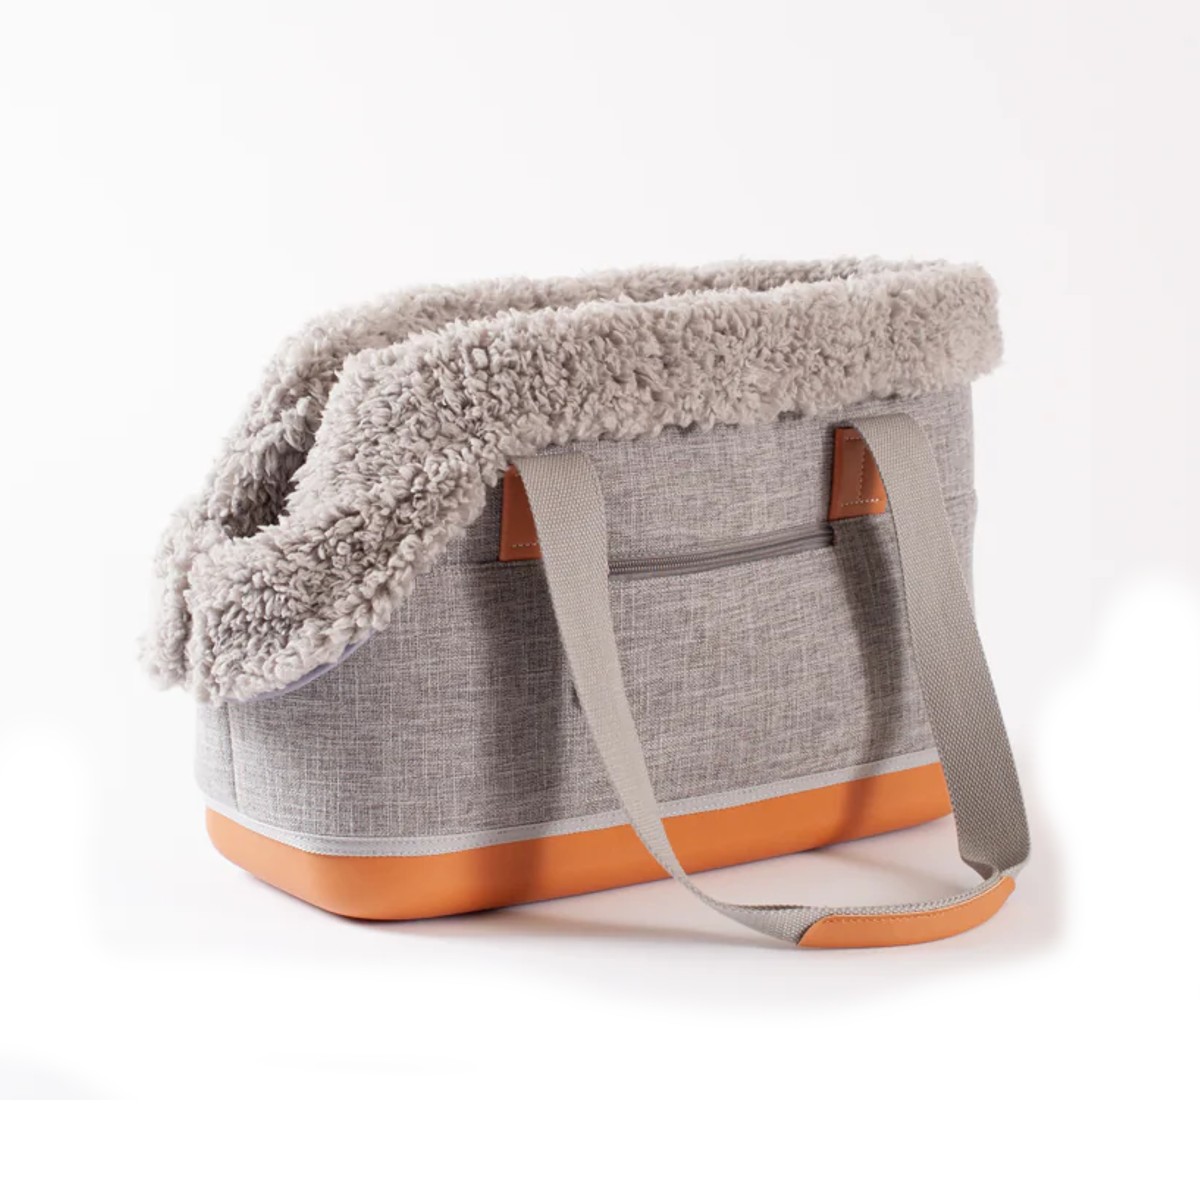 P.L.A.Y. x LeftPine Deluxe Dog Carrier - Gray